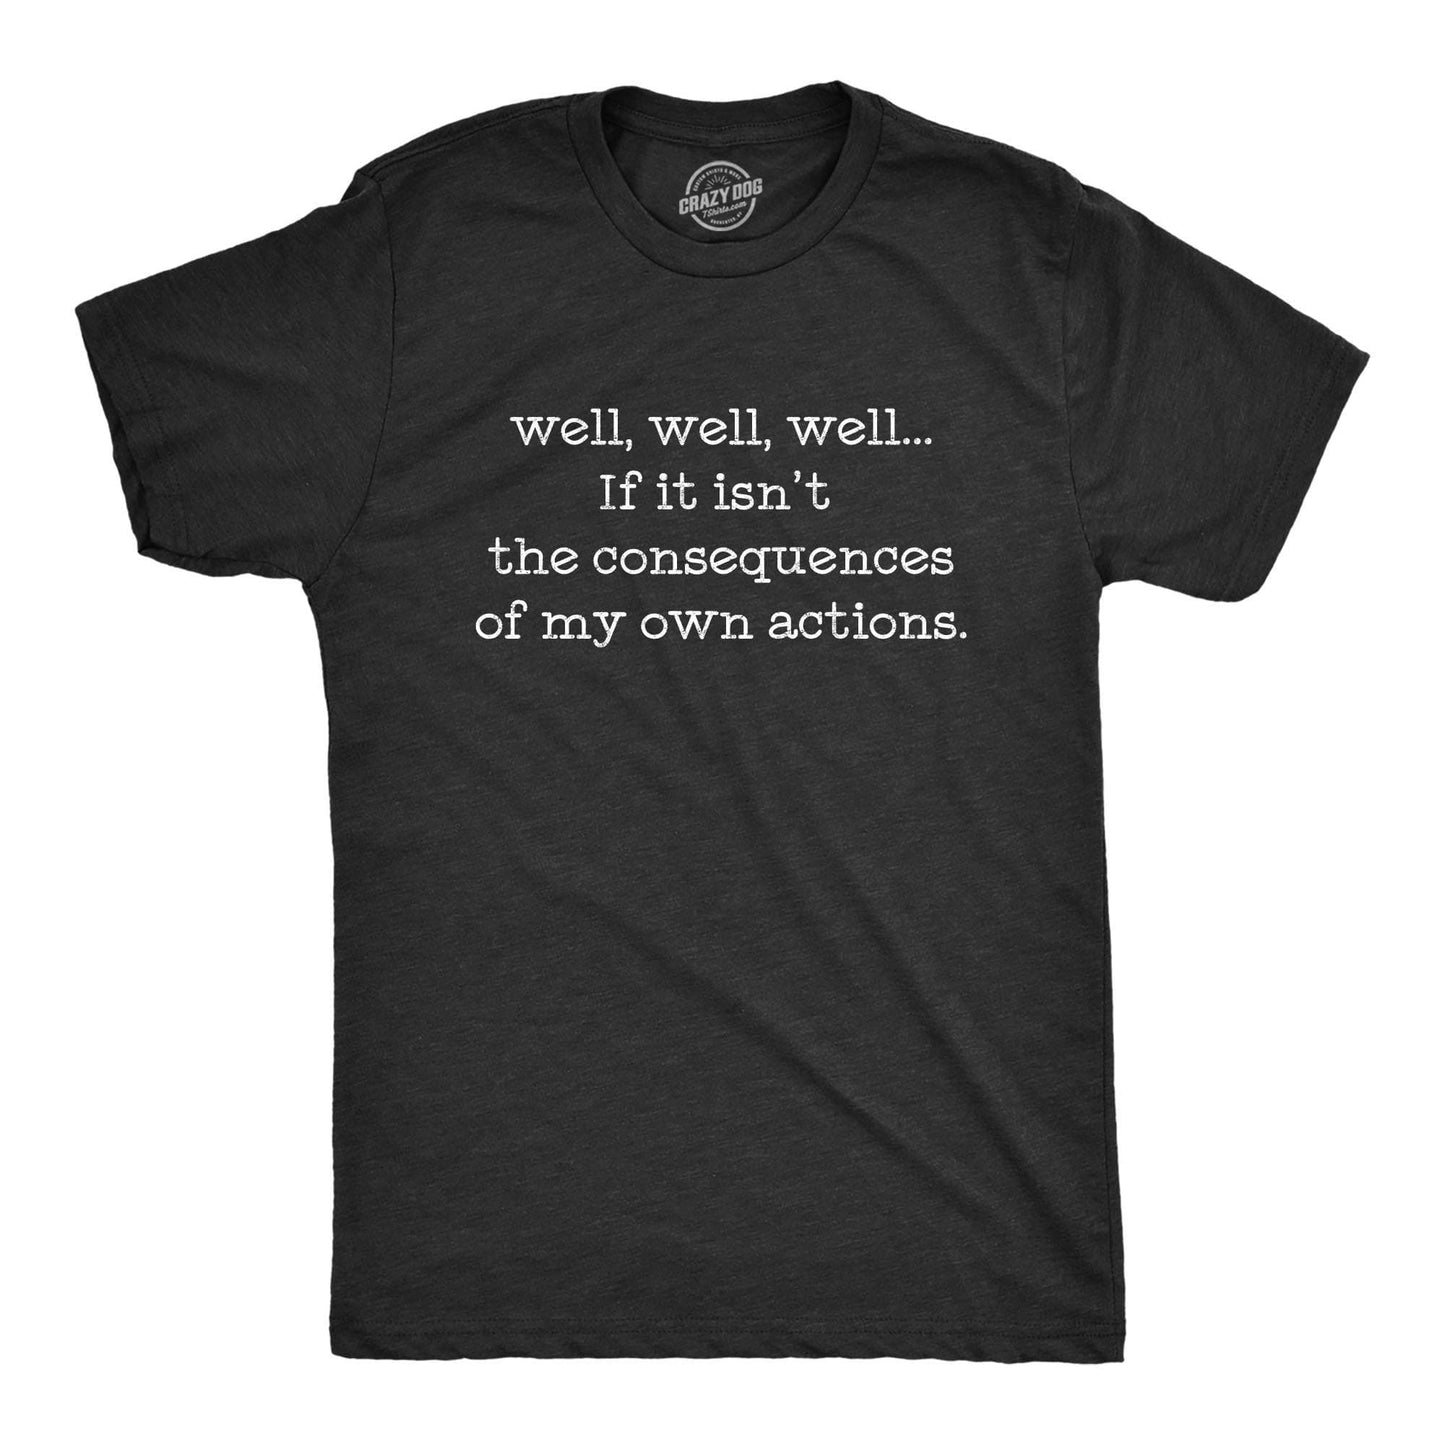 If It Isn't The Consequences Of My Own Actions Men's T Shirt